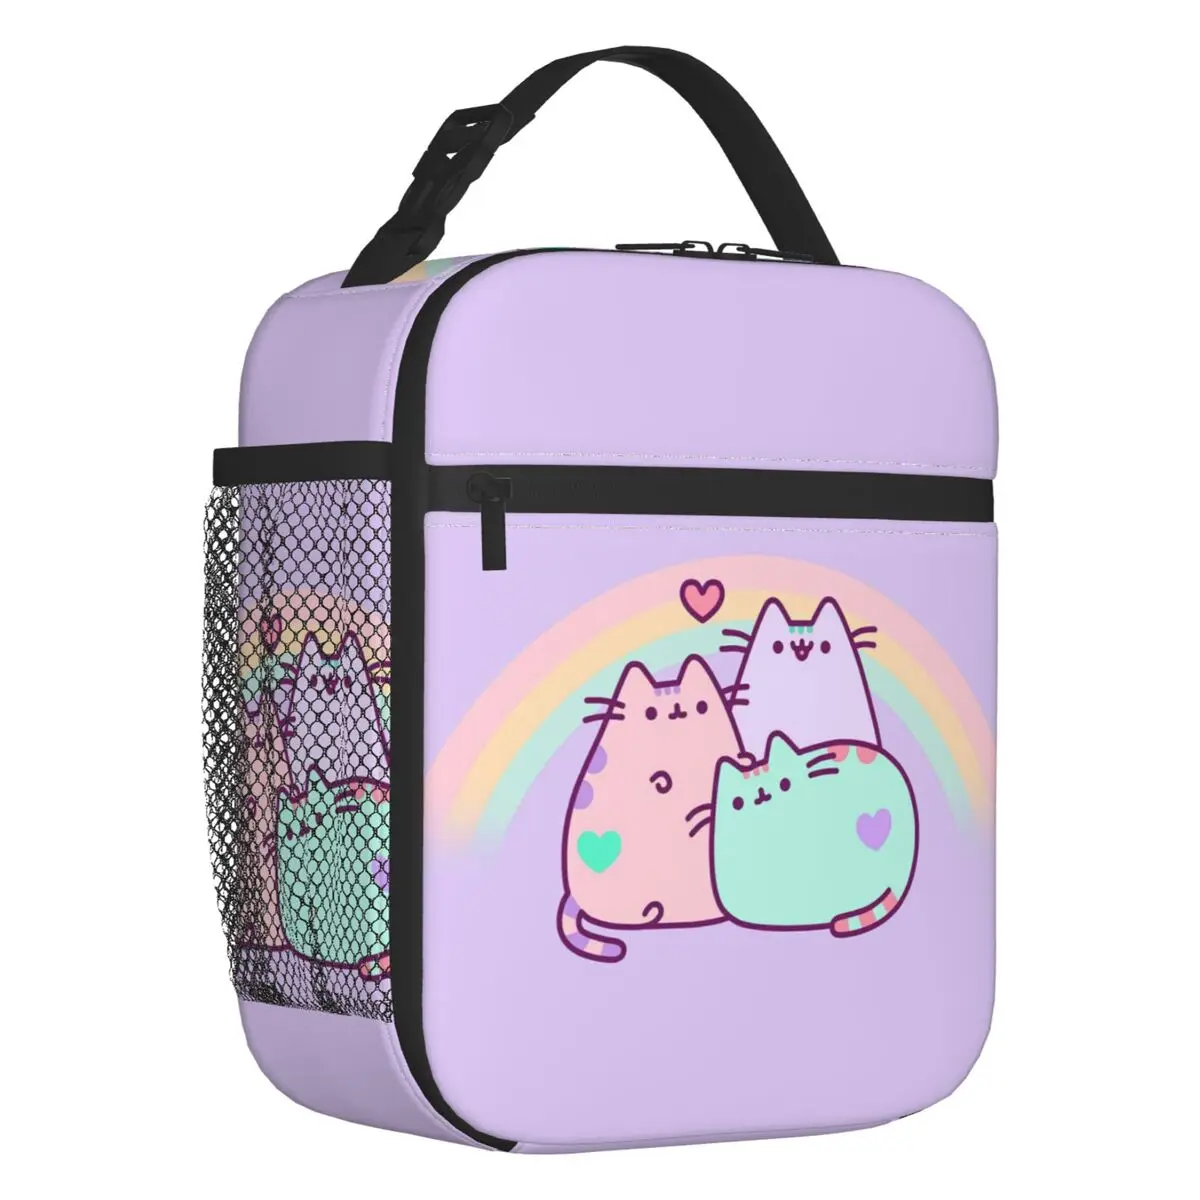 Pusheens Cat Rainbow Heart Thermal Insulated Lunch Bag Women Catroon Kitten Portable Lunch Container for Work Storage Food Box